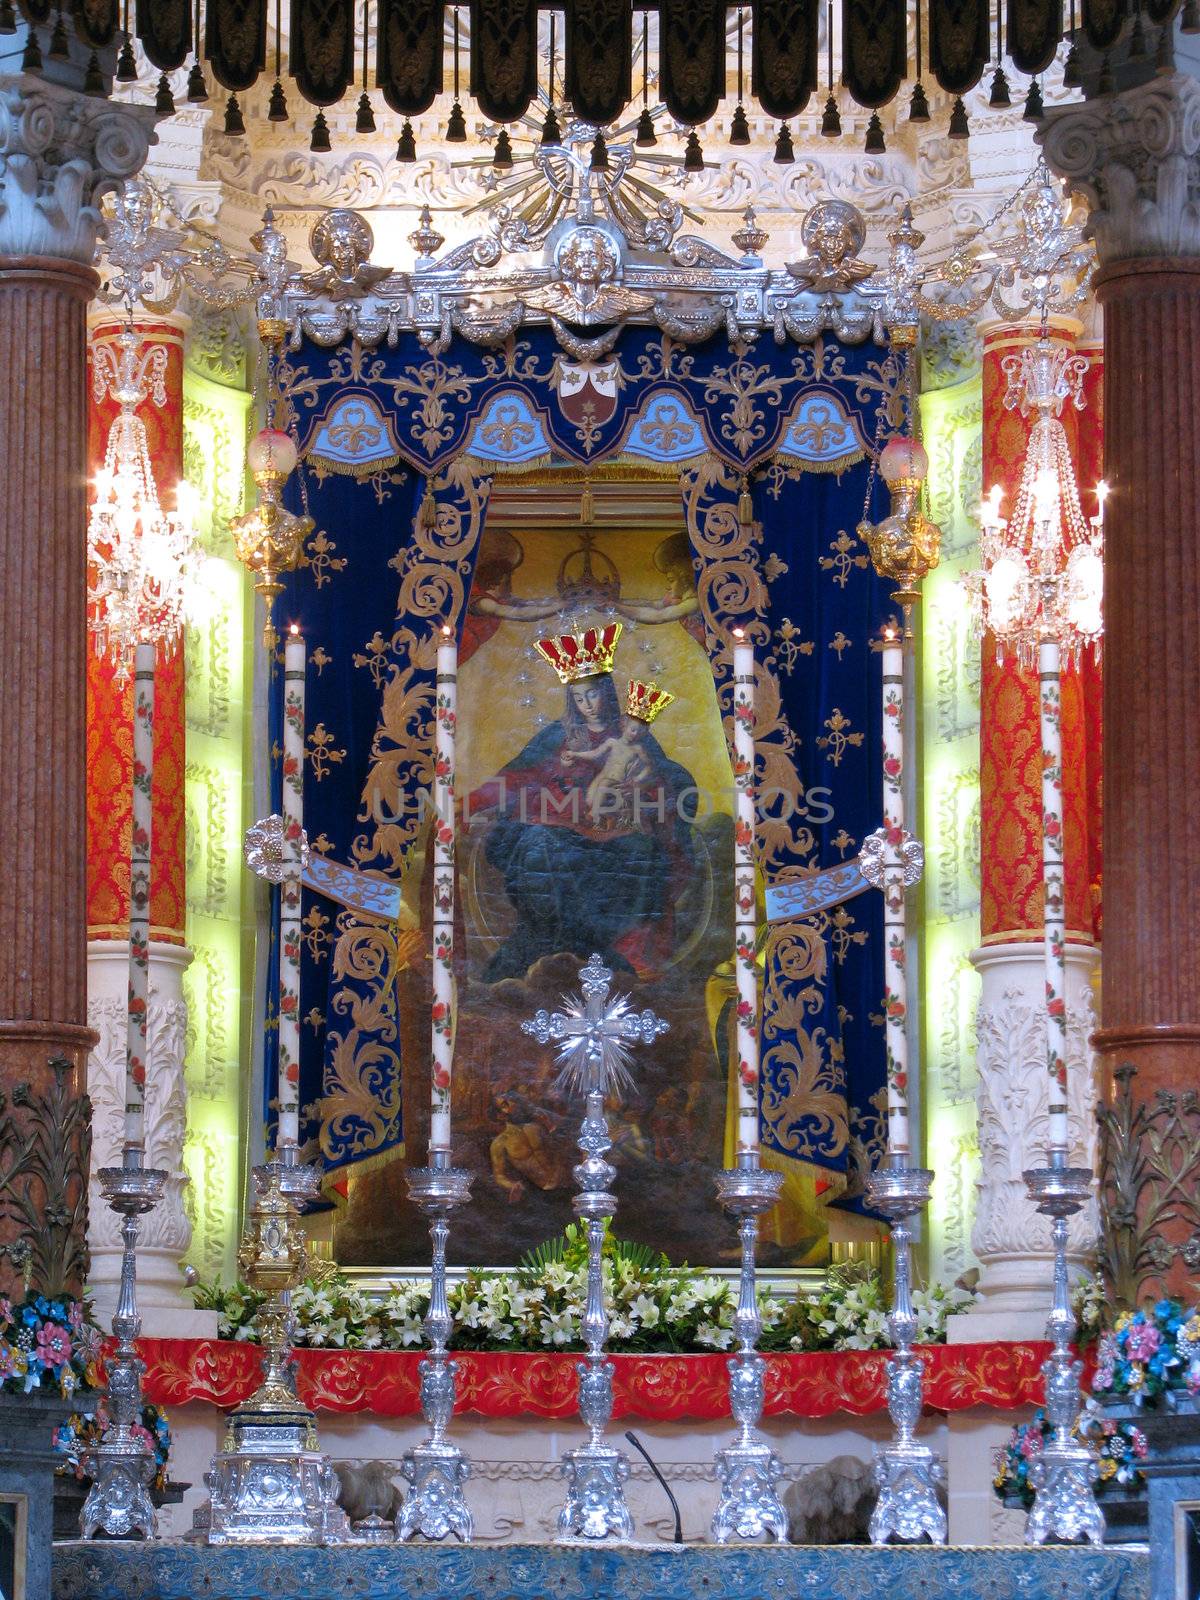 A painting of Our Lady of Mount Carmel in Valletta, Malta.